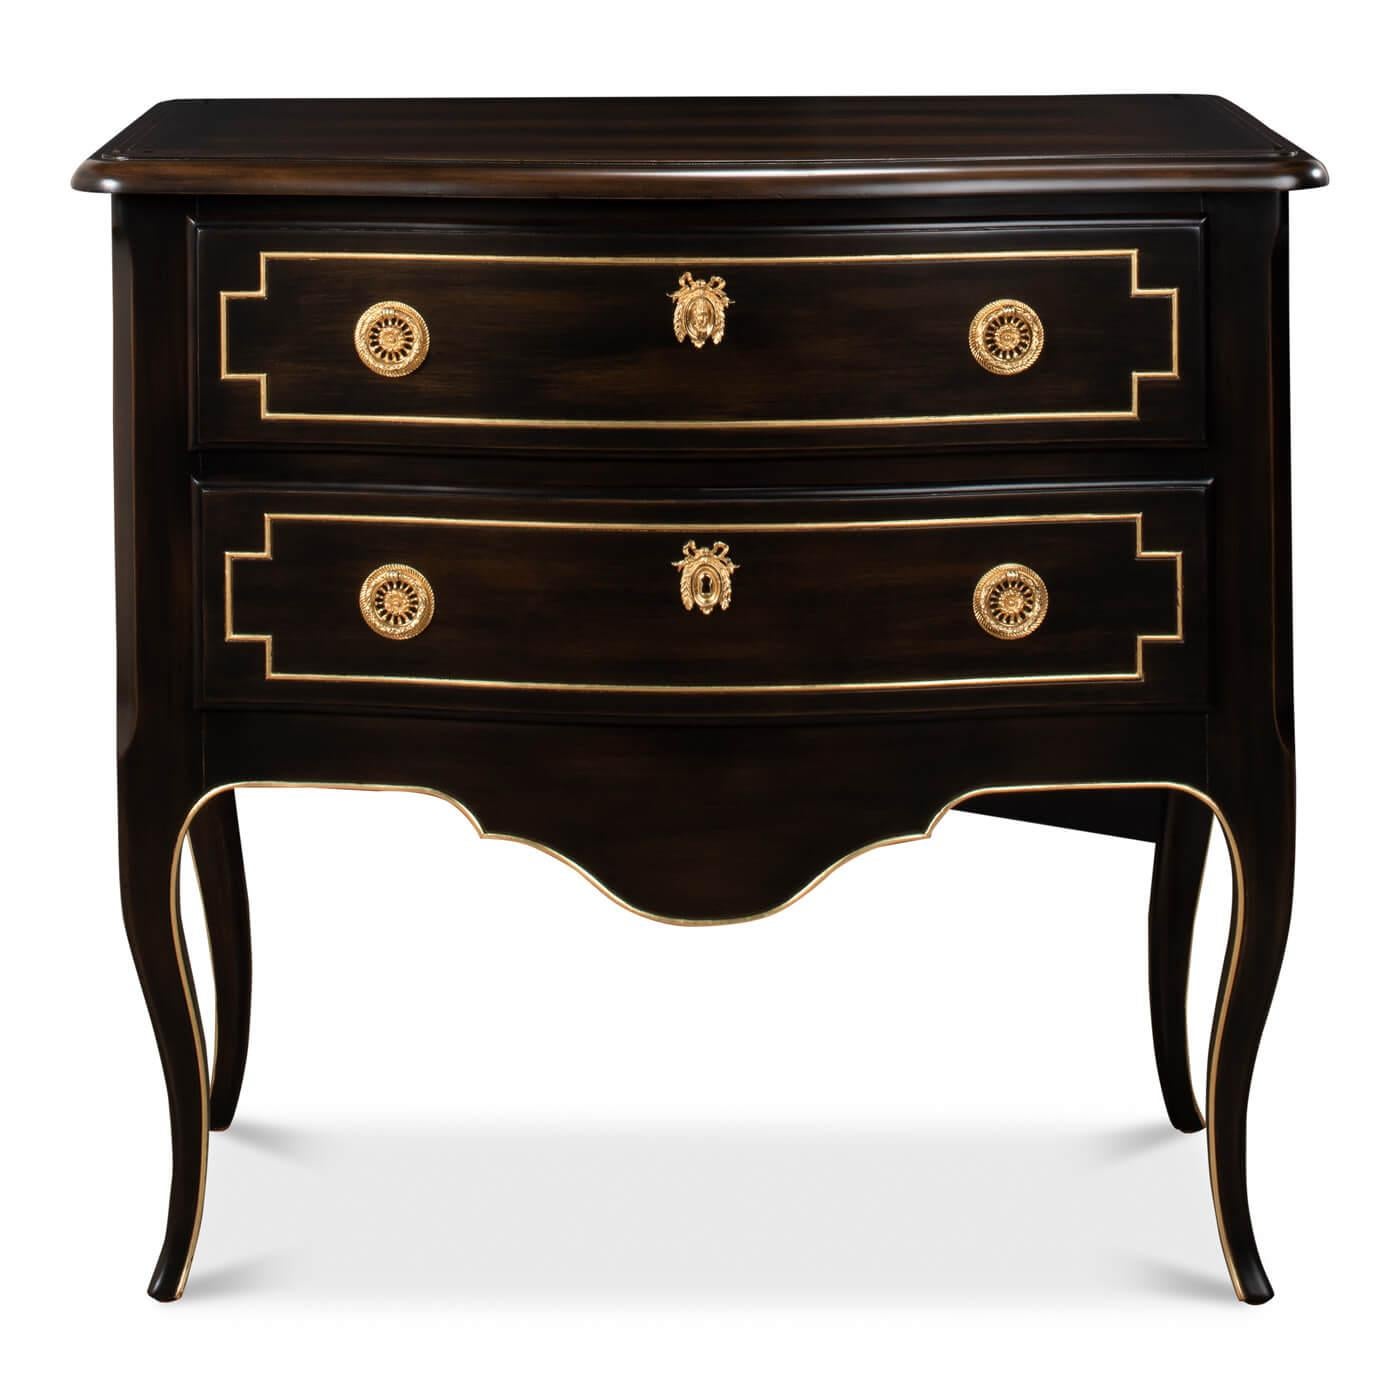 European provincial serpentine dresser, this two-drawer chest, with a walnut handpainted elegant 